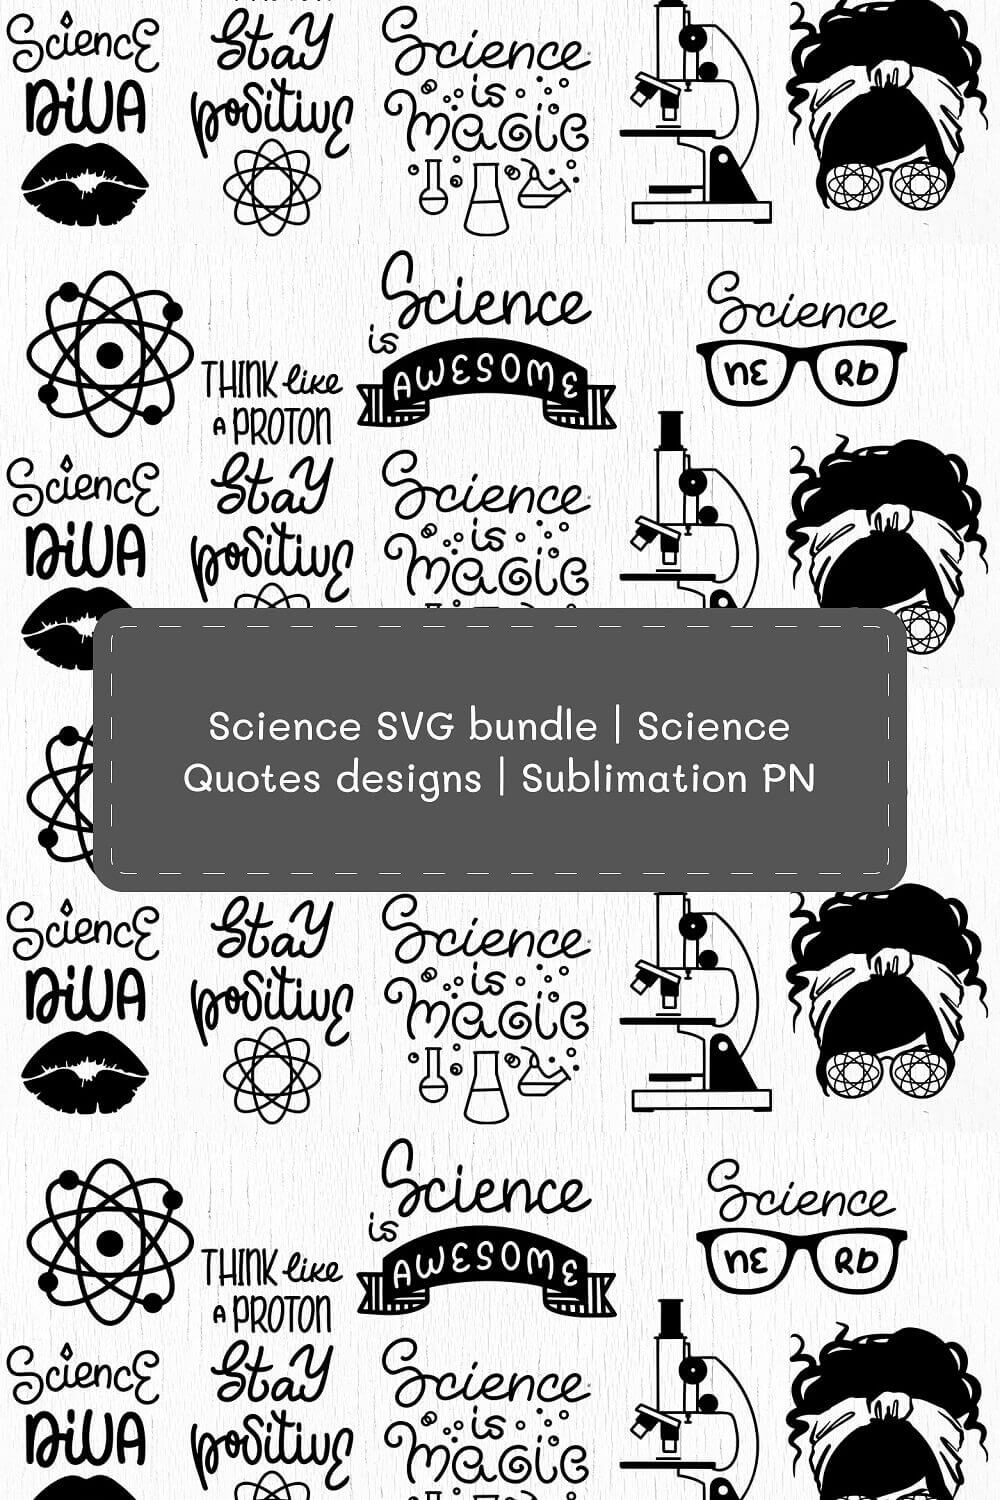 Logos with inscription "Science Diva", "Science is Magic" and other.